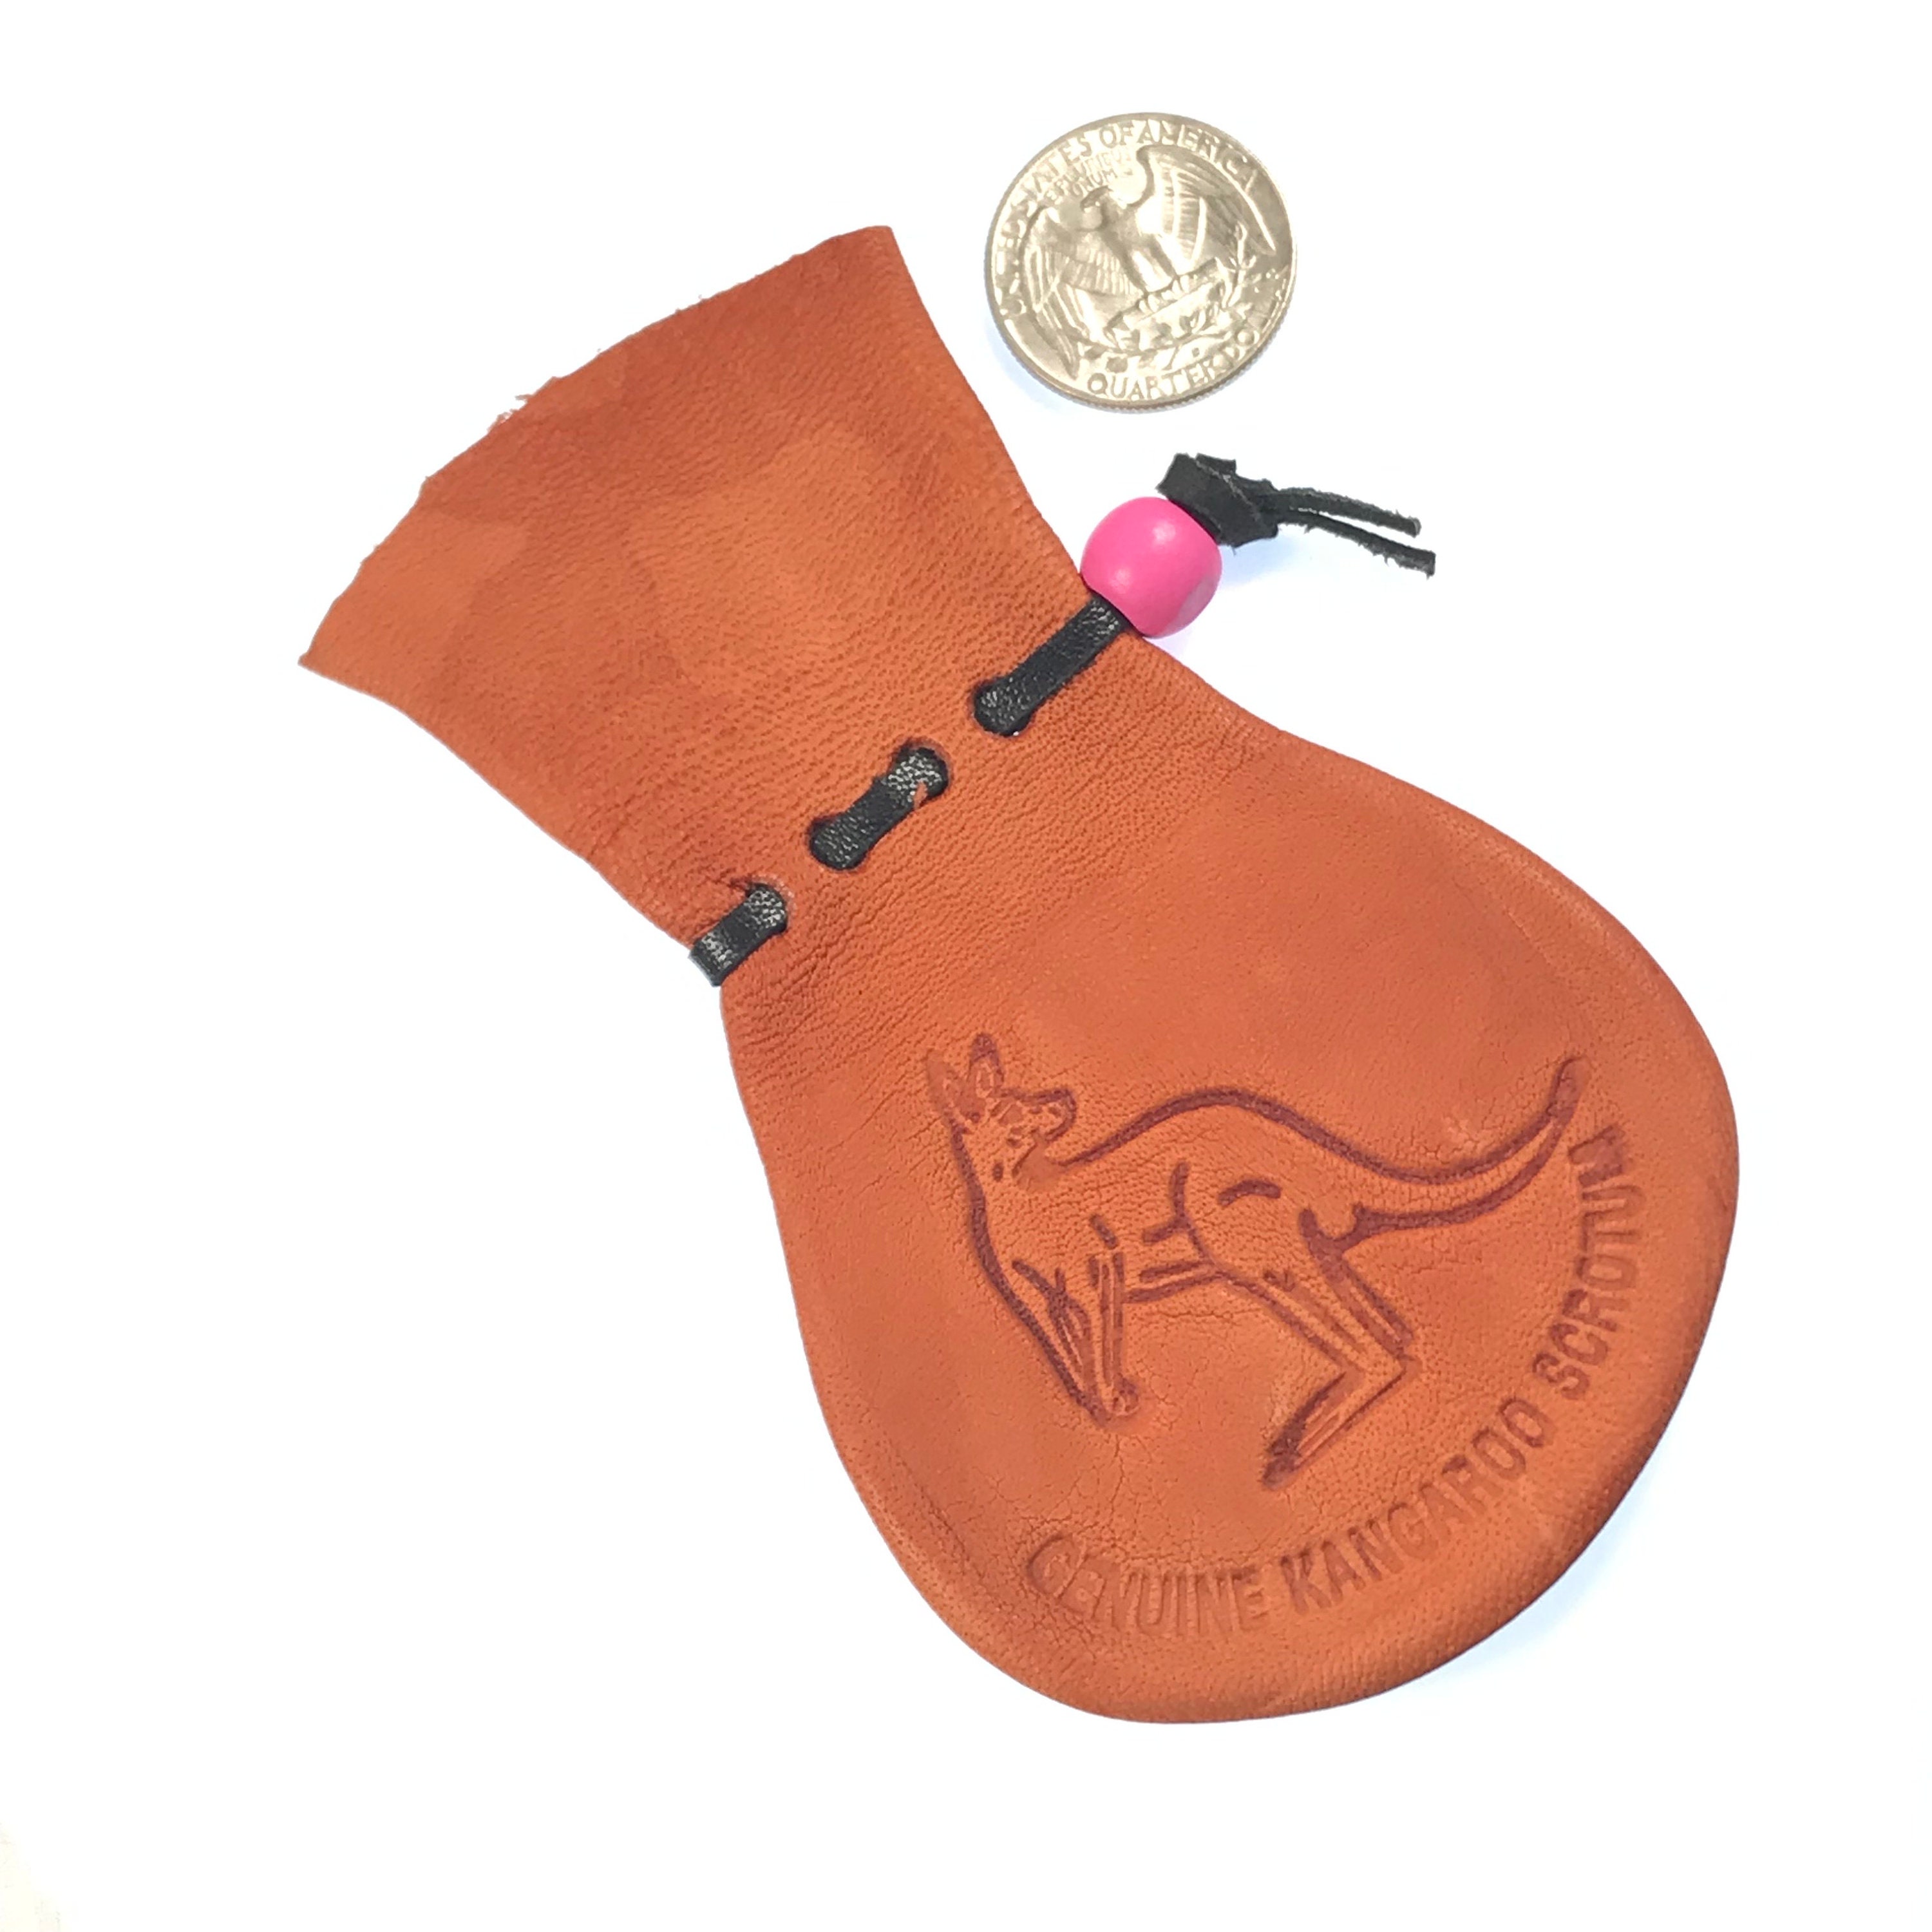 LEATHER POUCH KANGAROO SCROTUM JUMBO WALLET REAL MEN'S COIN PURSE GIFT |  eBay